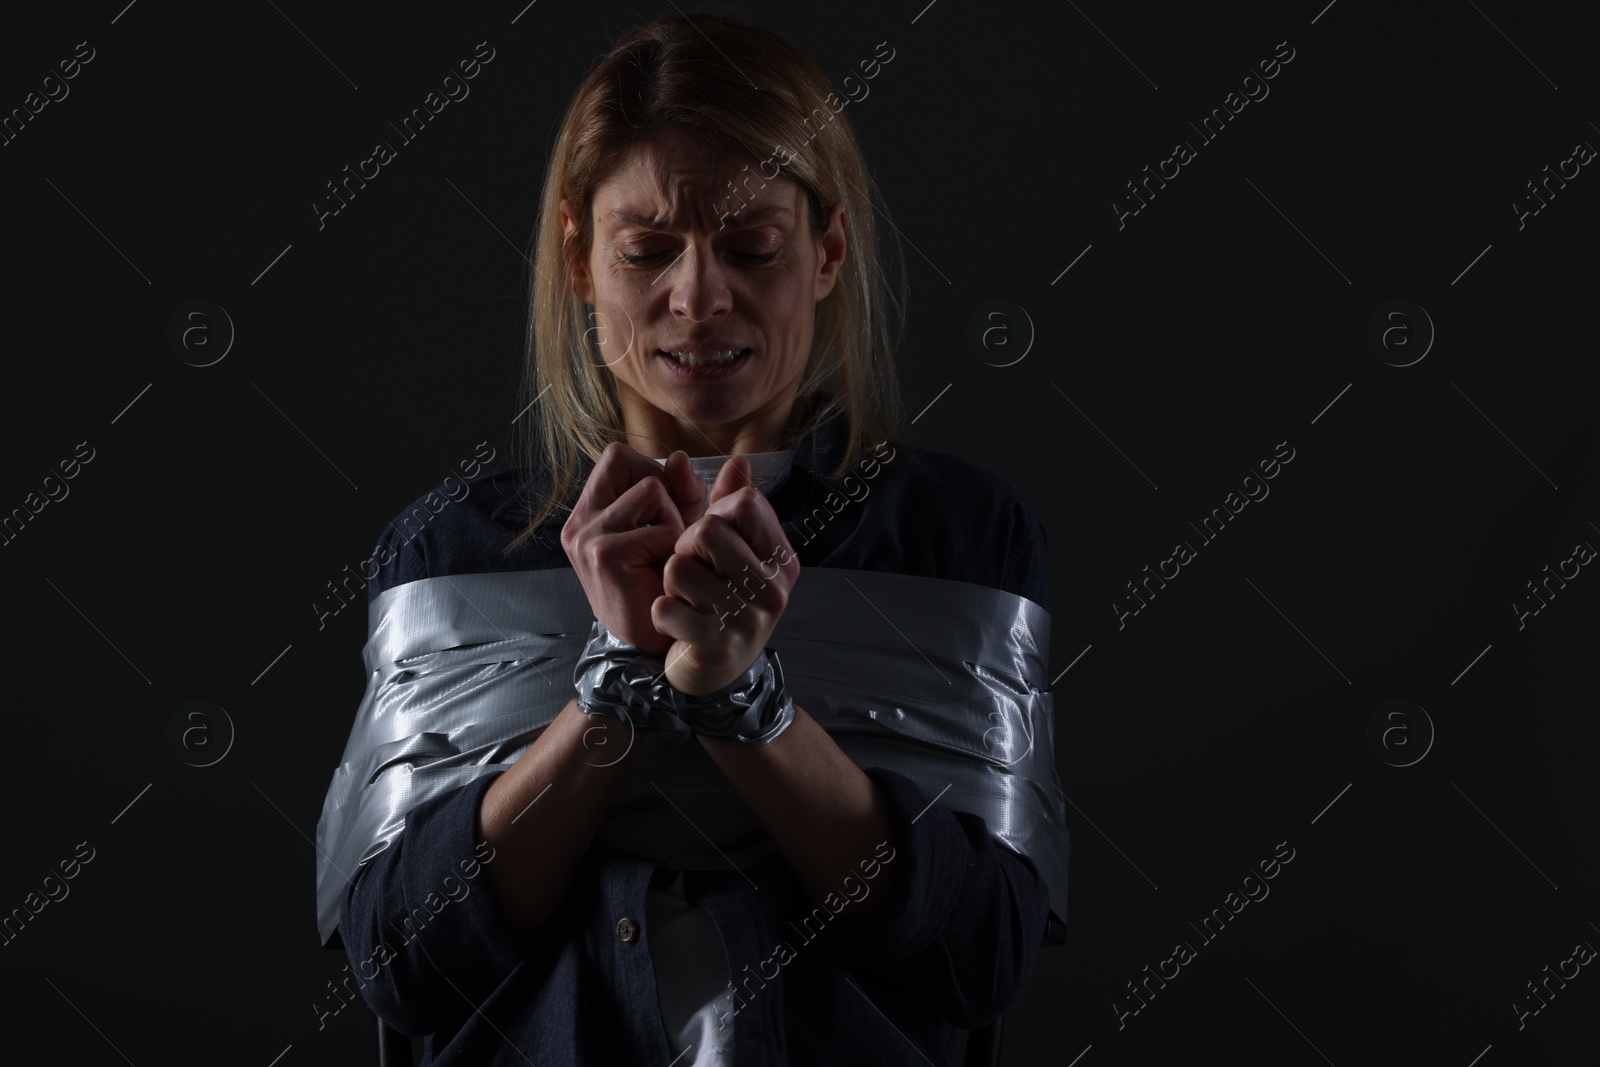 Photo of Woman taped up and taken hostage on dark background